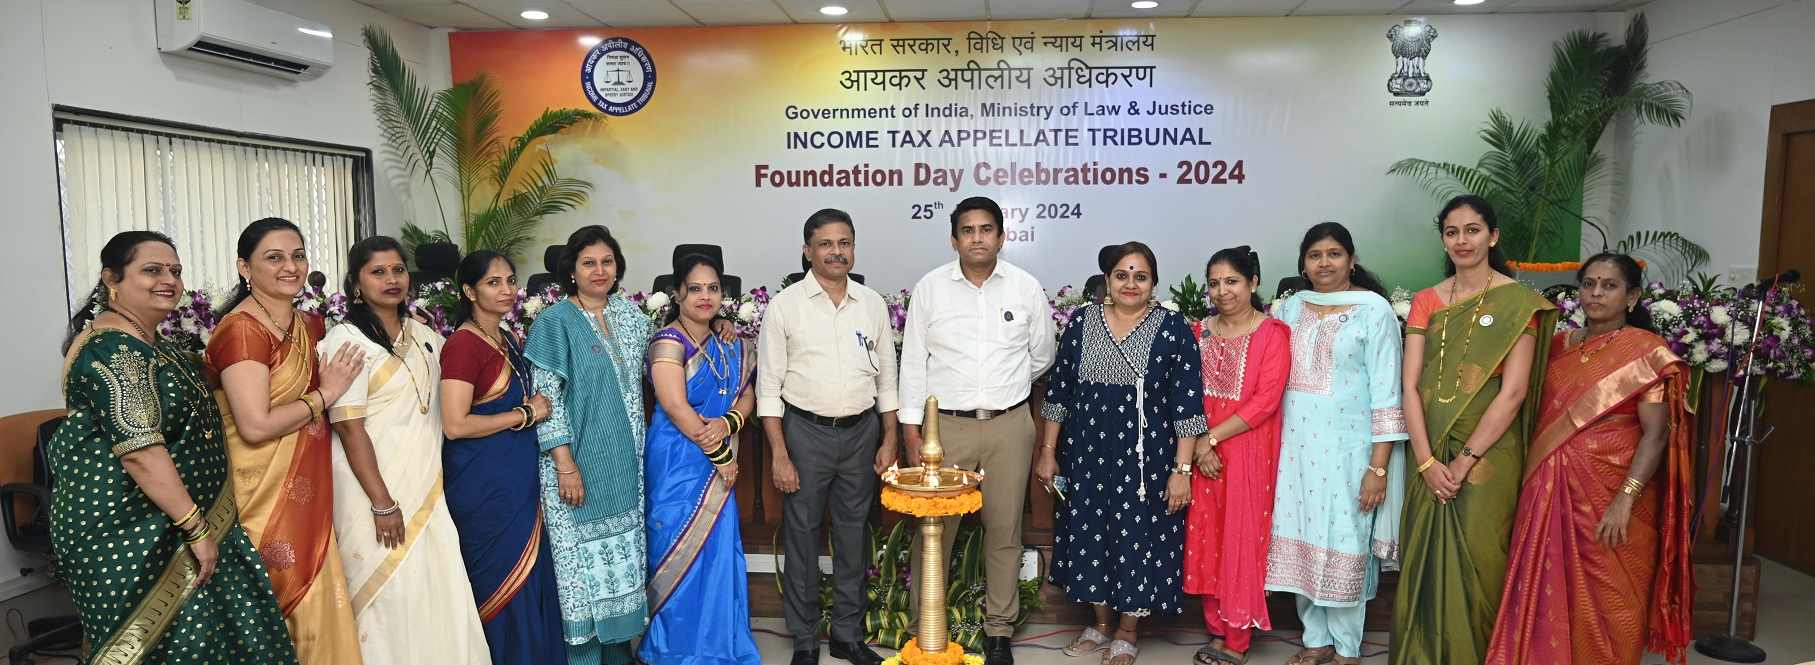 ITAT Foundation Day Celebrations, 2024 at Mumbai - Group photo of officers and staff of the Registry.                                                                                                                                                          